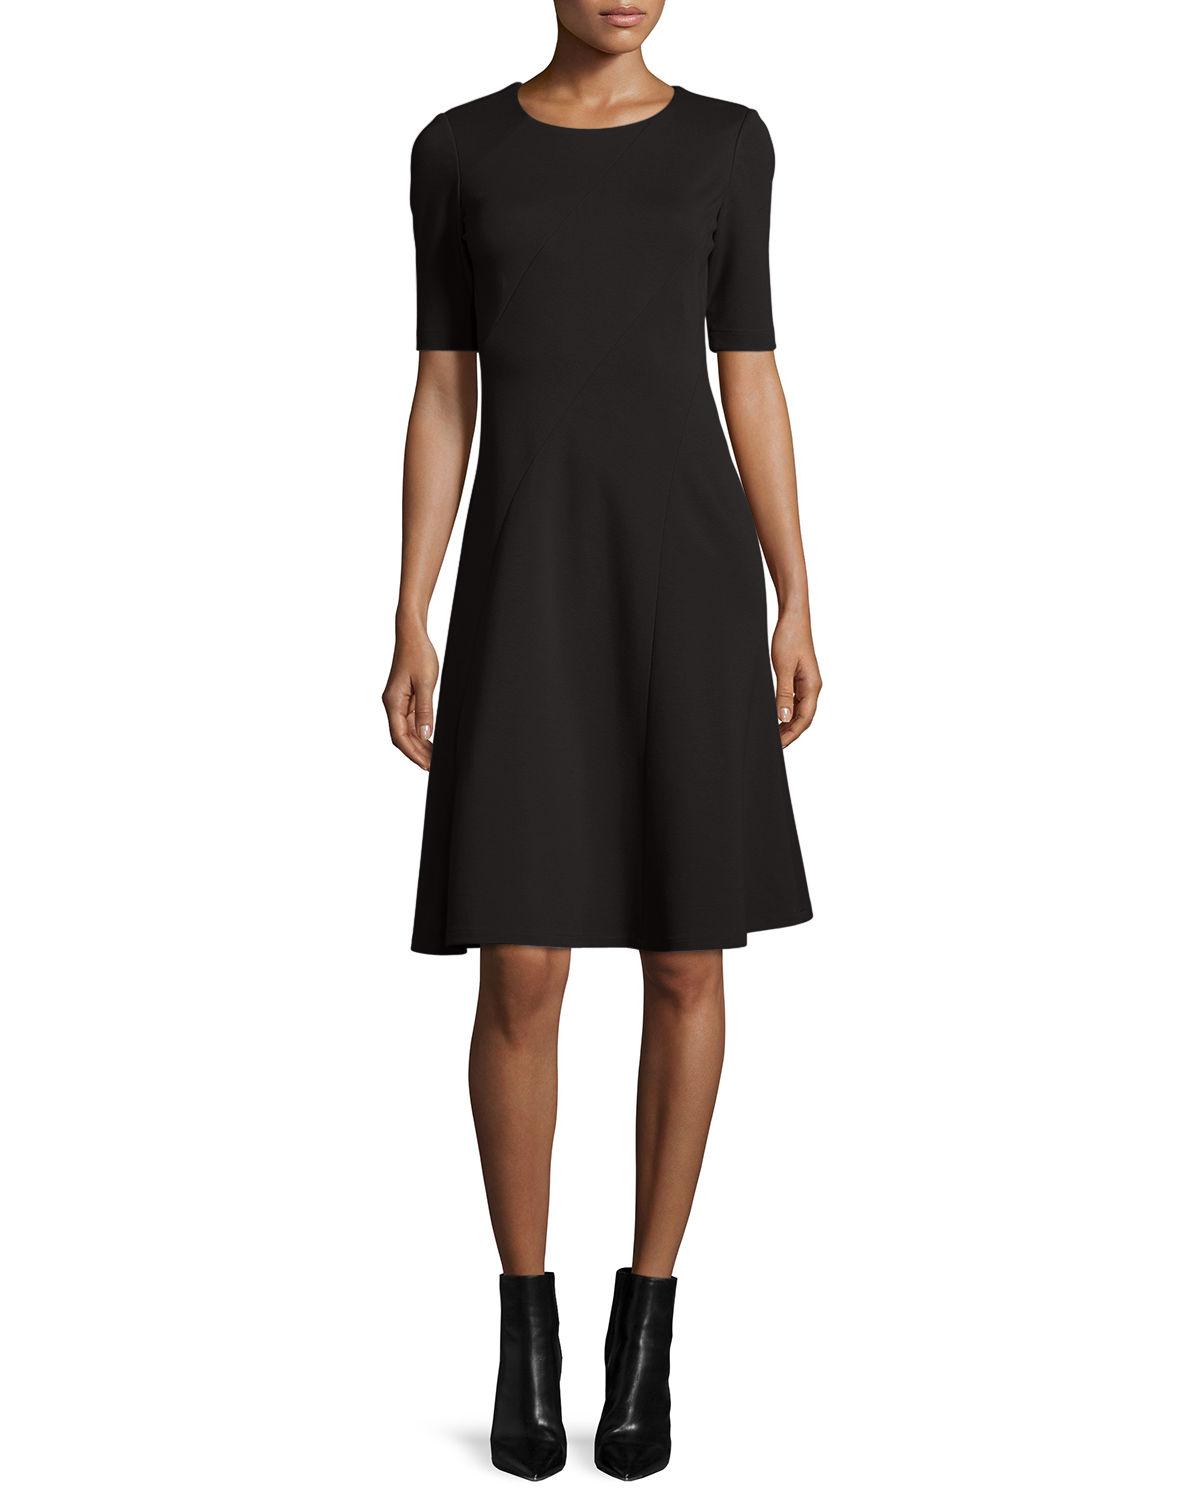 Lafayette 148 new york Half-sleeve Fit-and-flare Dress in Black - Save